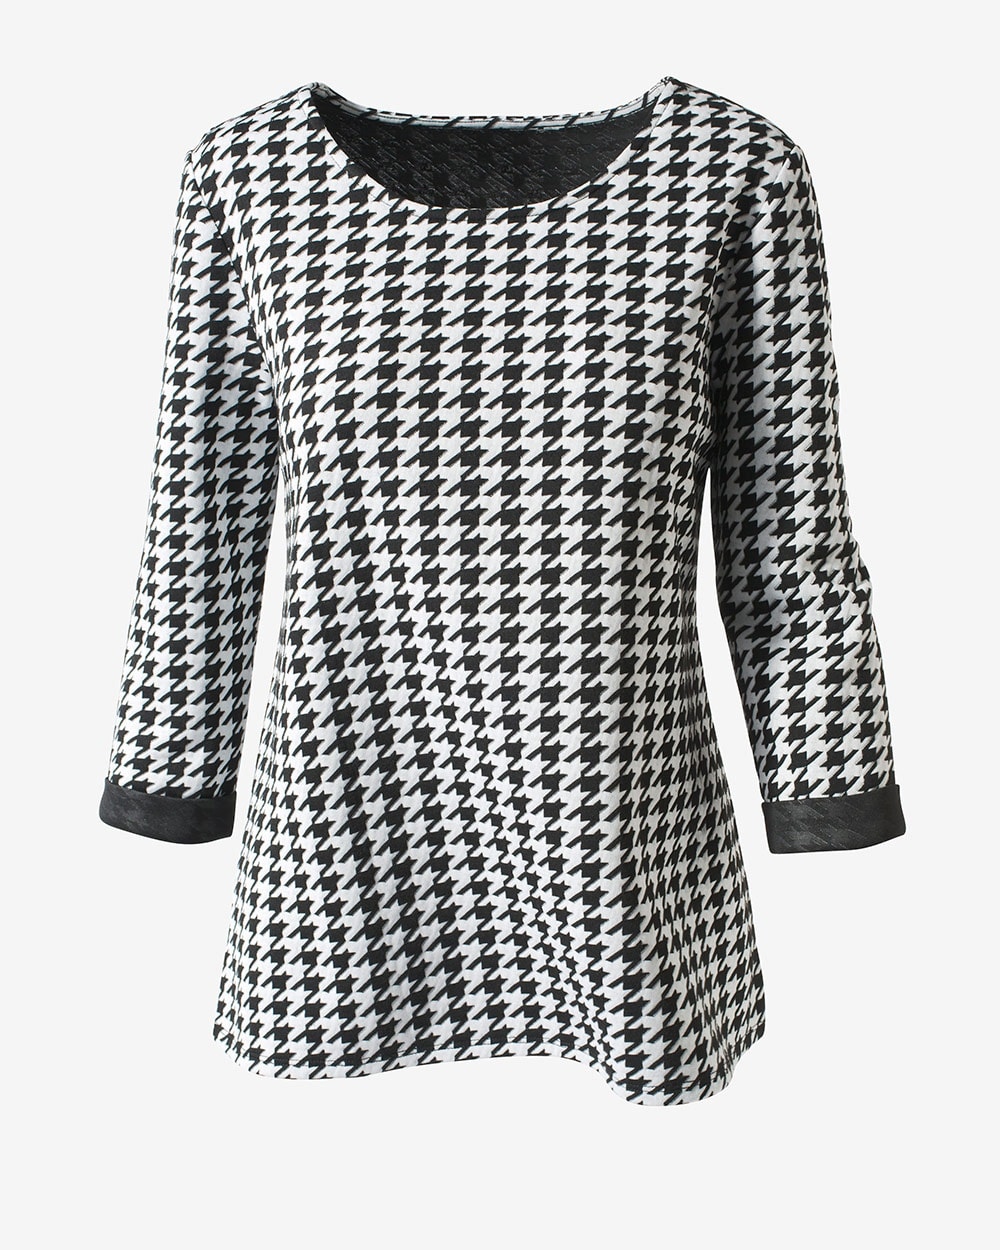 Double-Side Houndstooth Jacquard Tee